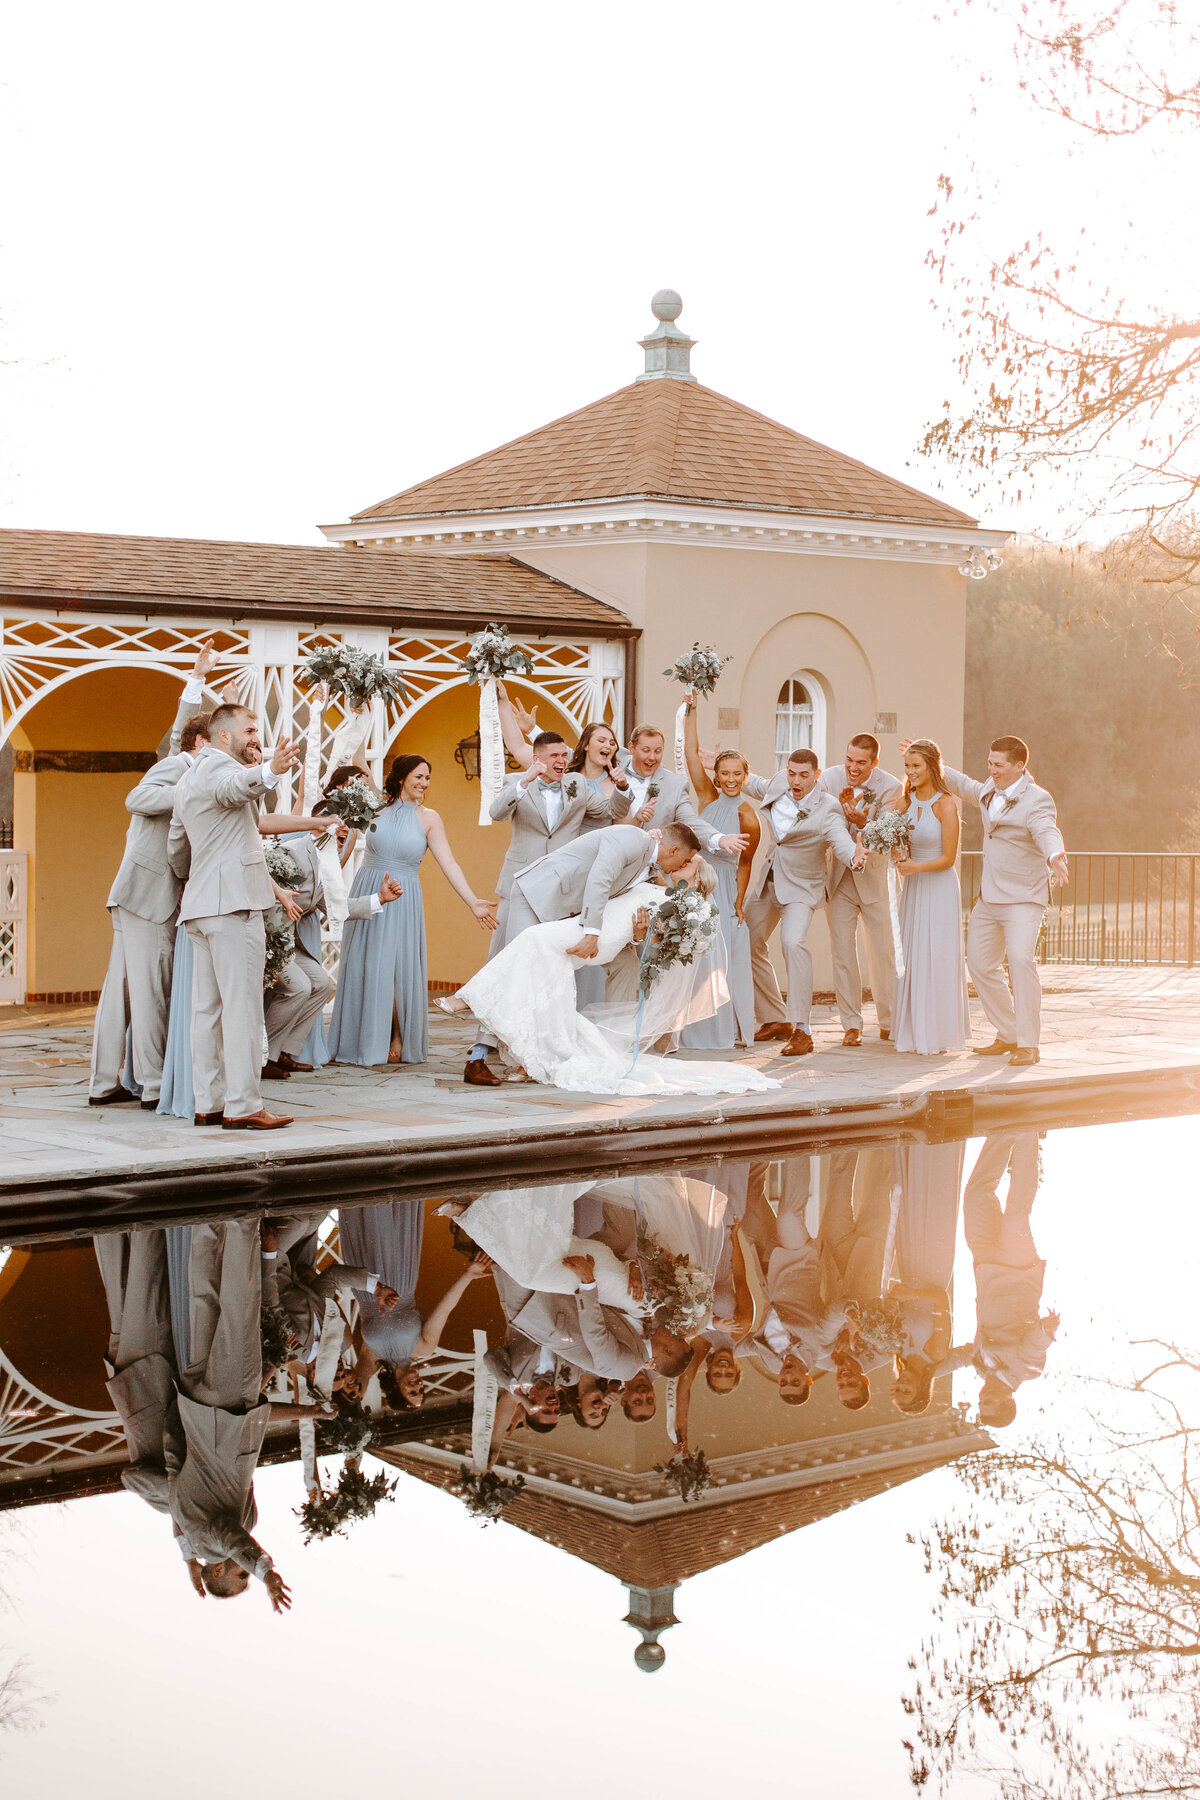 A bride and groom are kissing as the bride is being dipped, they are surrounded by their wedding party who are all cheering. The group stands behind a pool that perfectly reflects the image